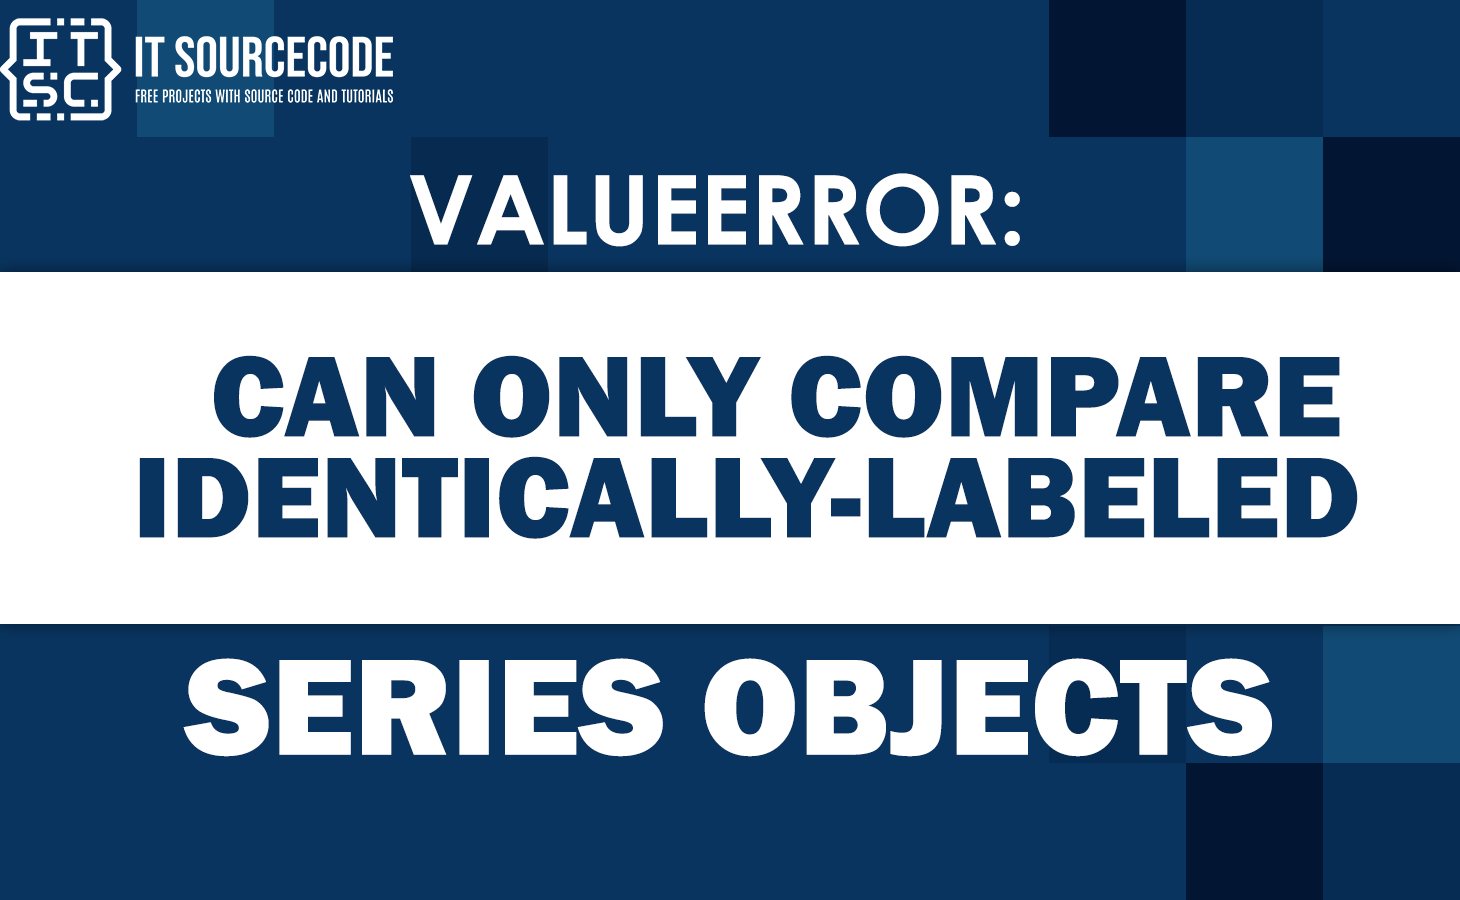 valueerror can only compare identically-labeled series objects